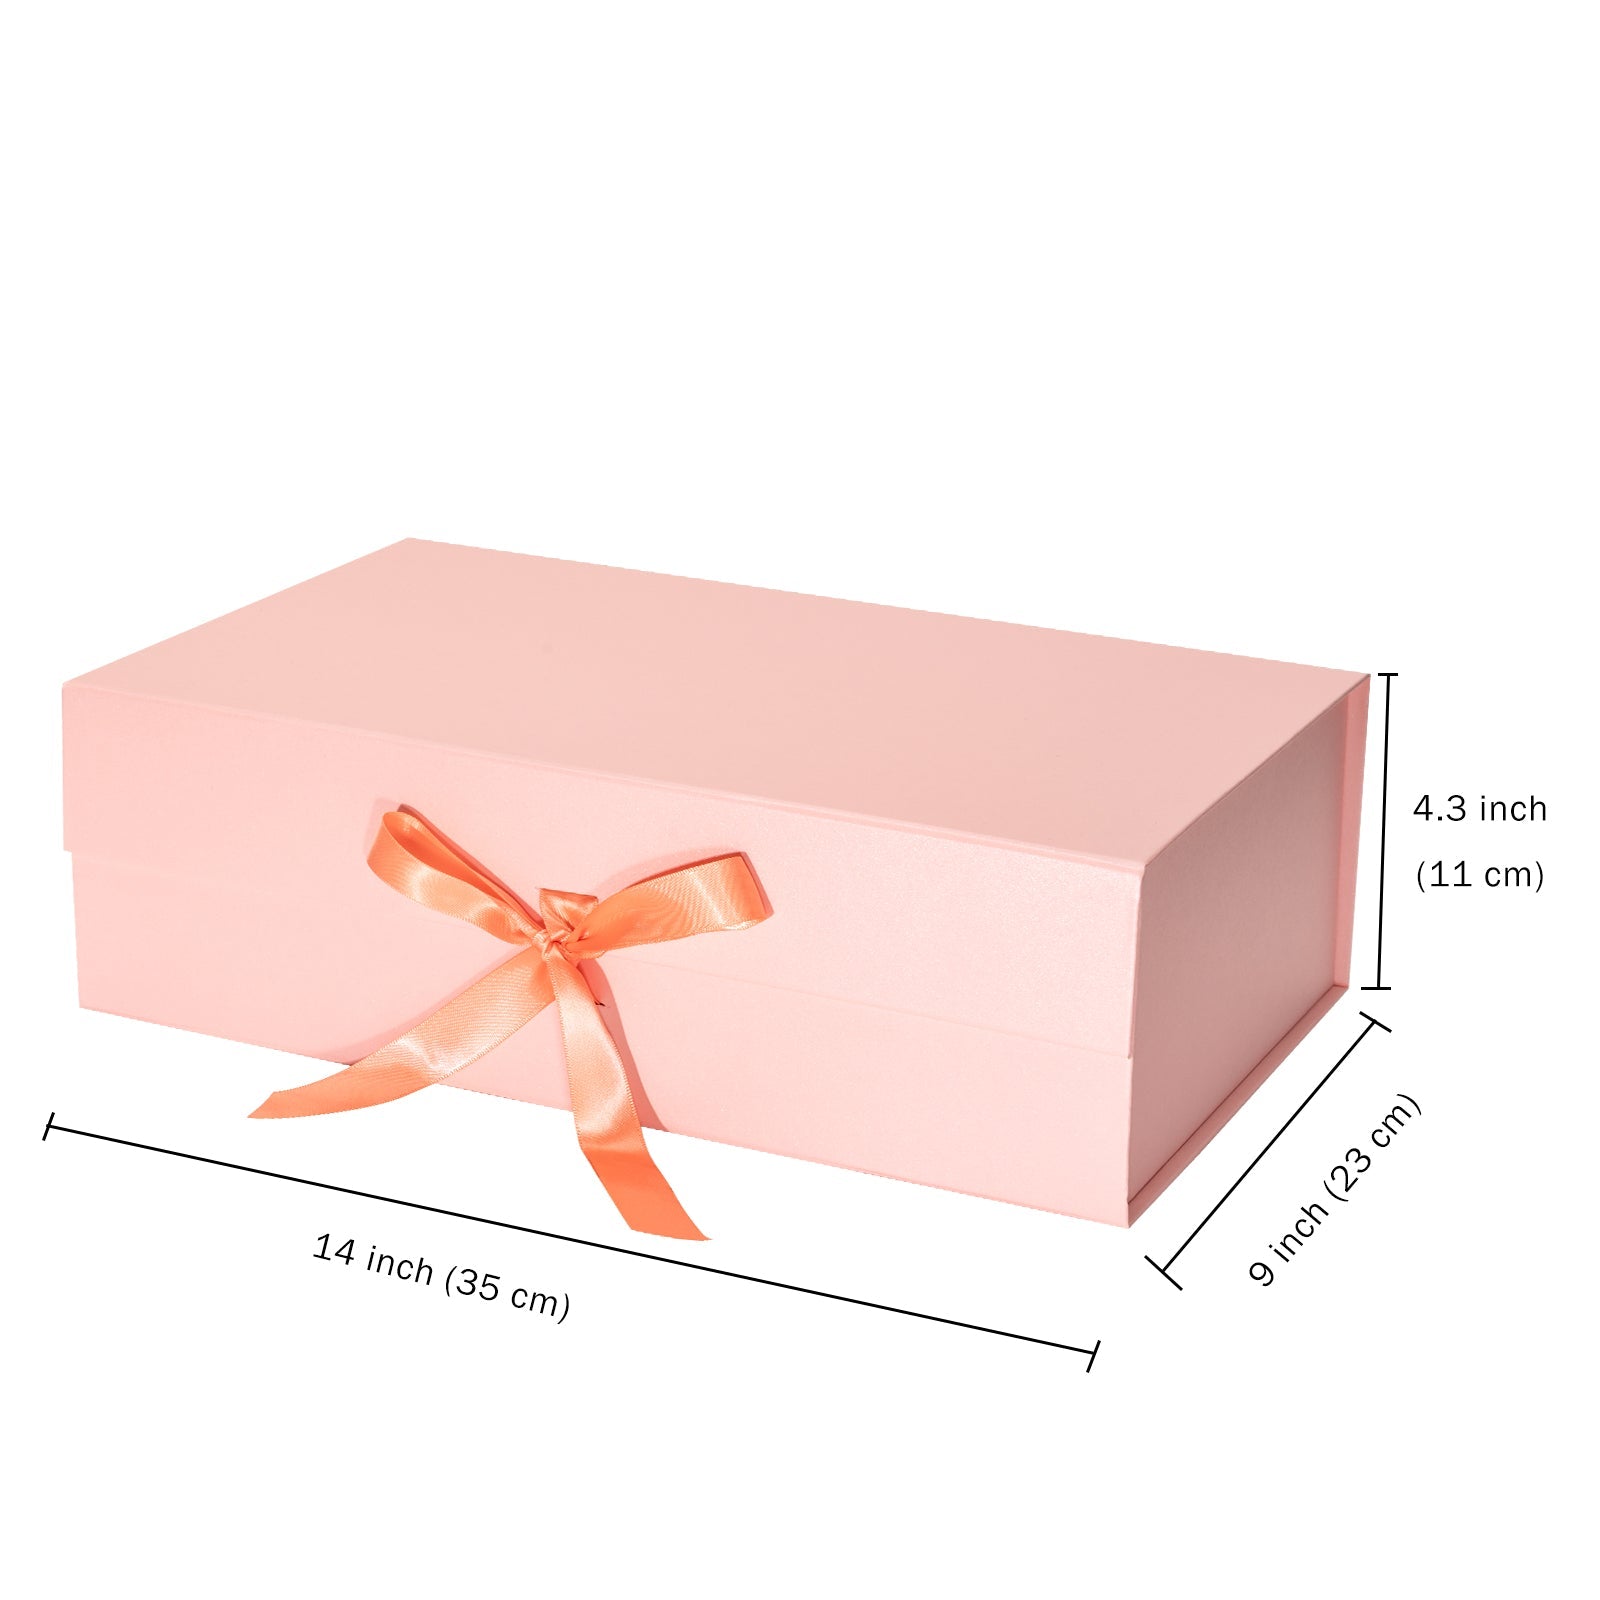 2 Pack 14X9x4.3 inch Magnetic Closure Box with Satin Ribbons